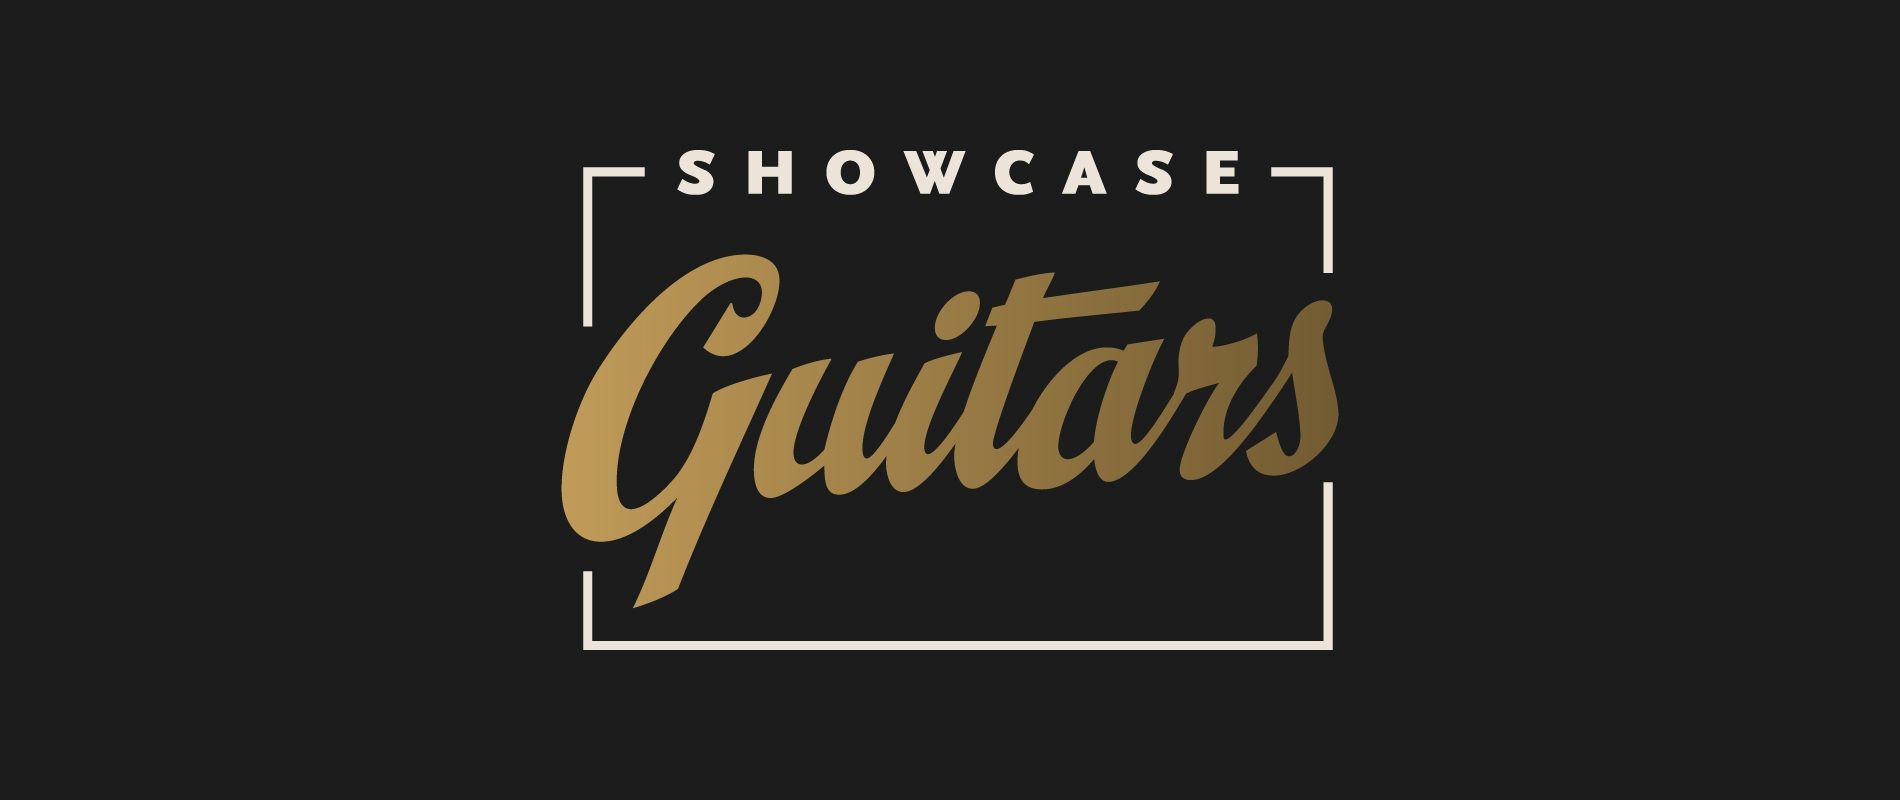 National Music Centre Launches Showcase: Guitars Exhibition on Get Out Your Guitar Day, February 11